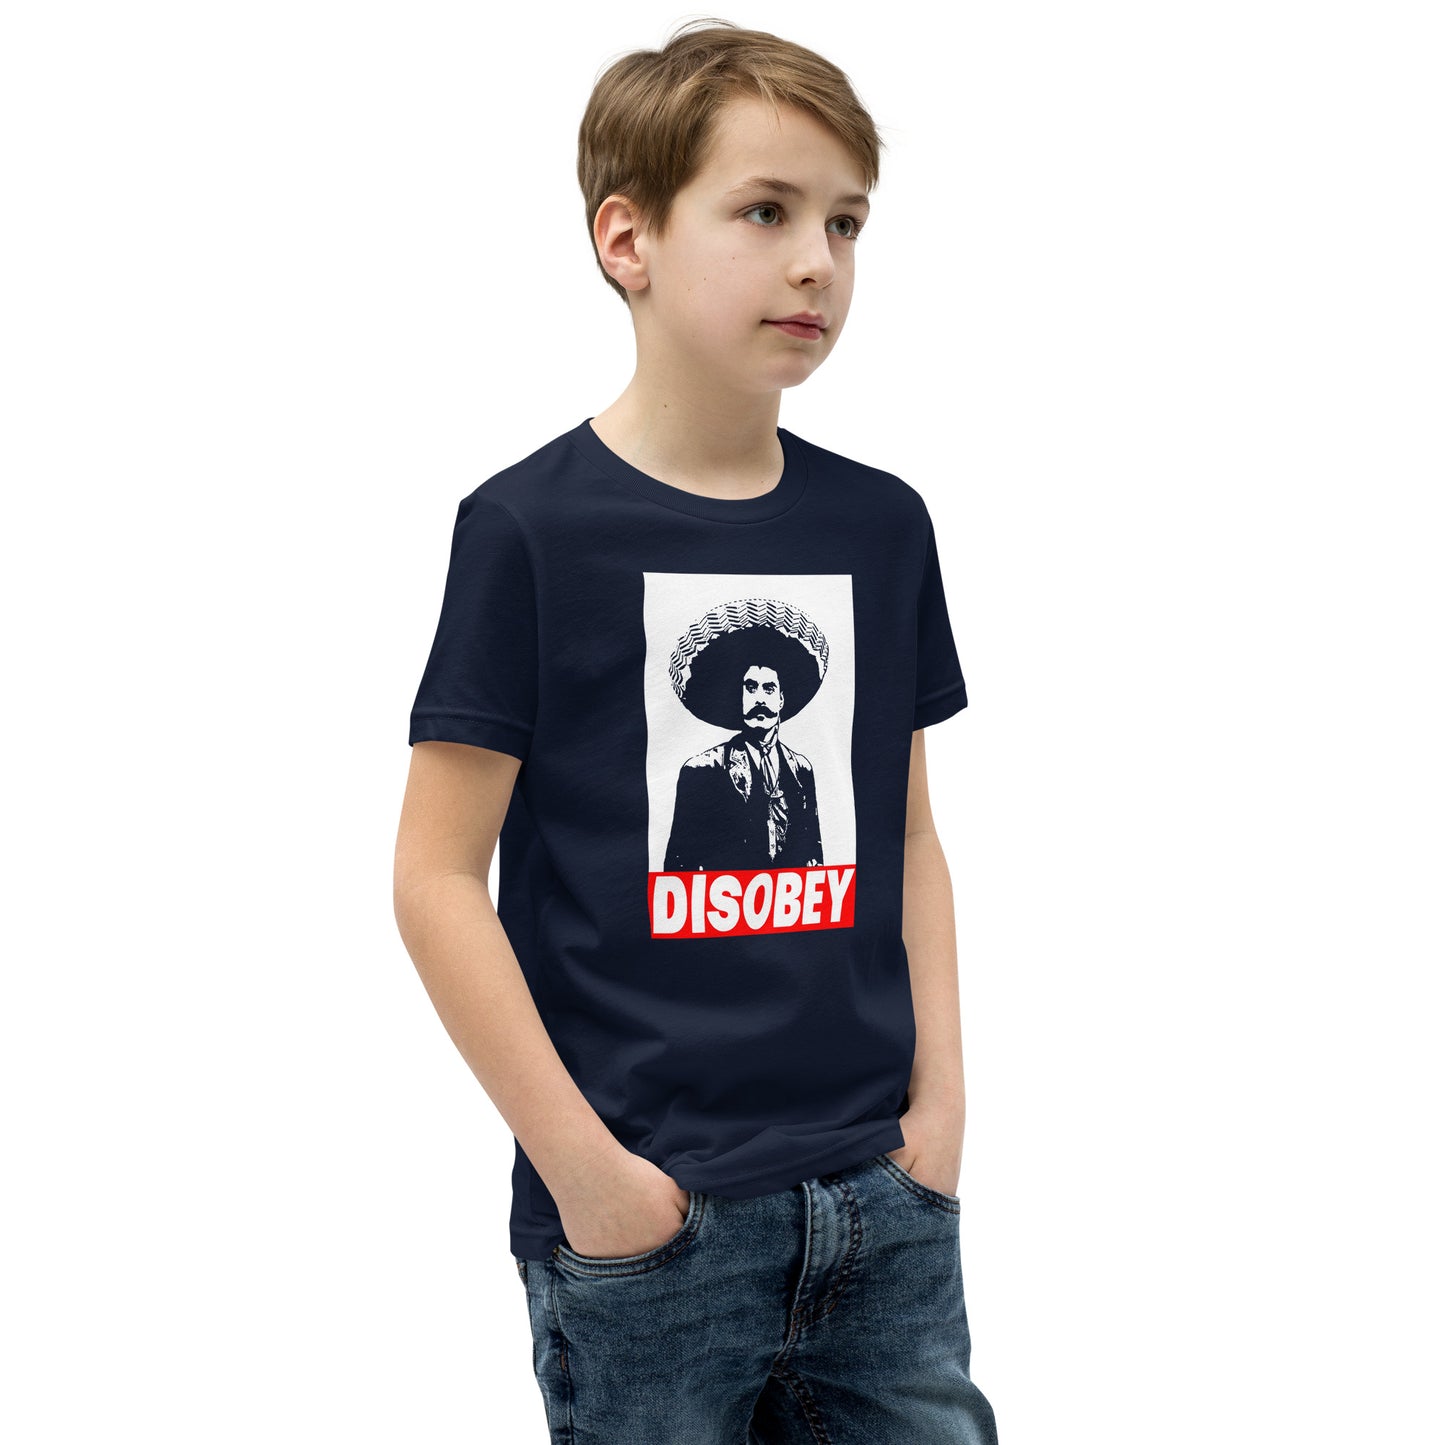 Zapata Disobey Youth Short Sleeve T-Shirt